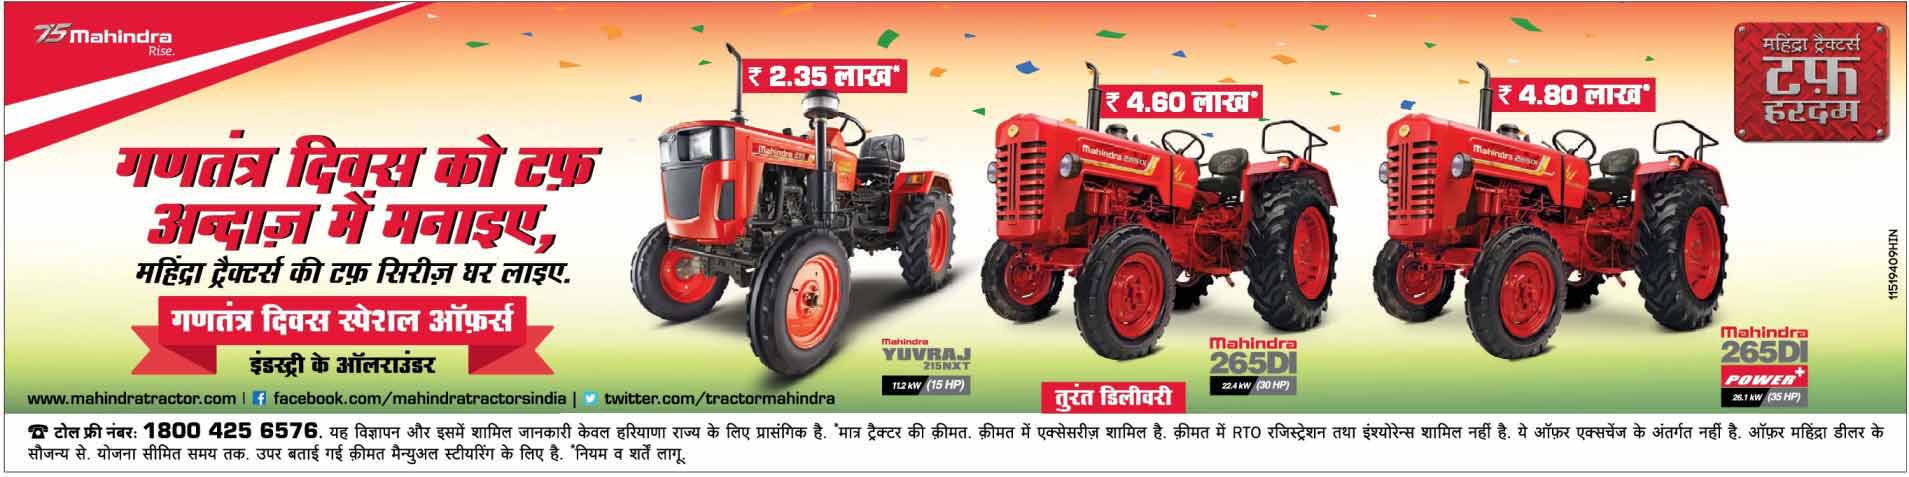 PROMPT AND IMMEDIATE DELIVERY OF TRACTORS FOR FARMERS IN HARYANA